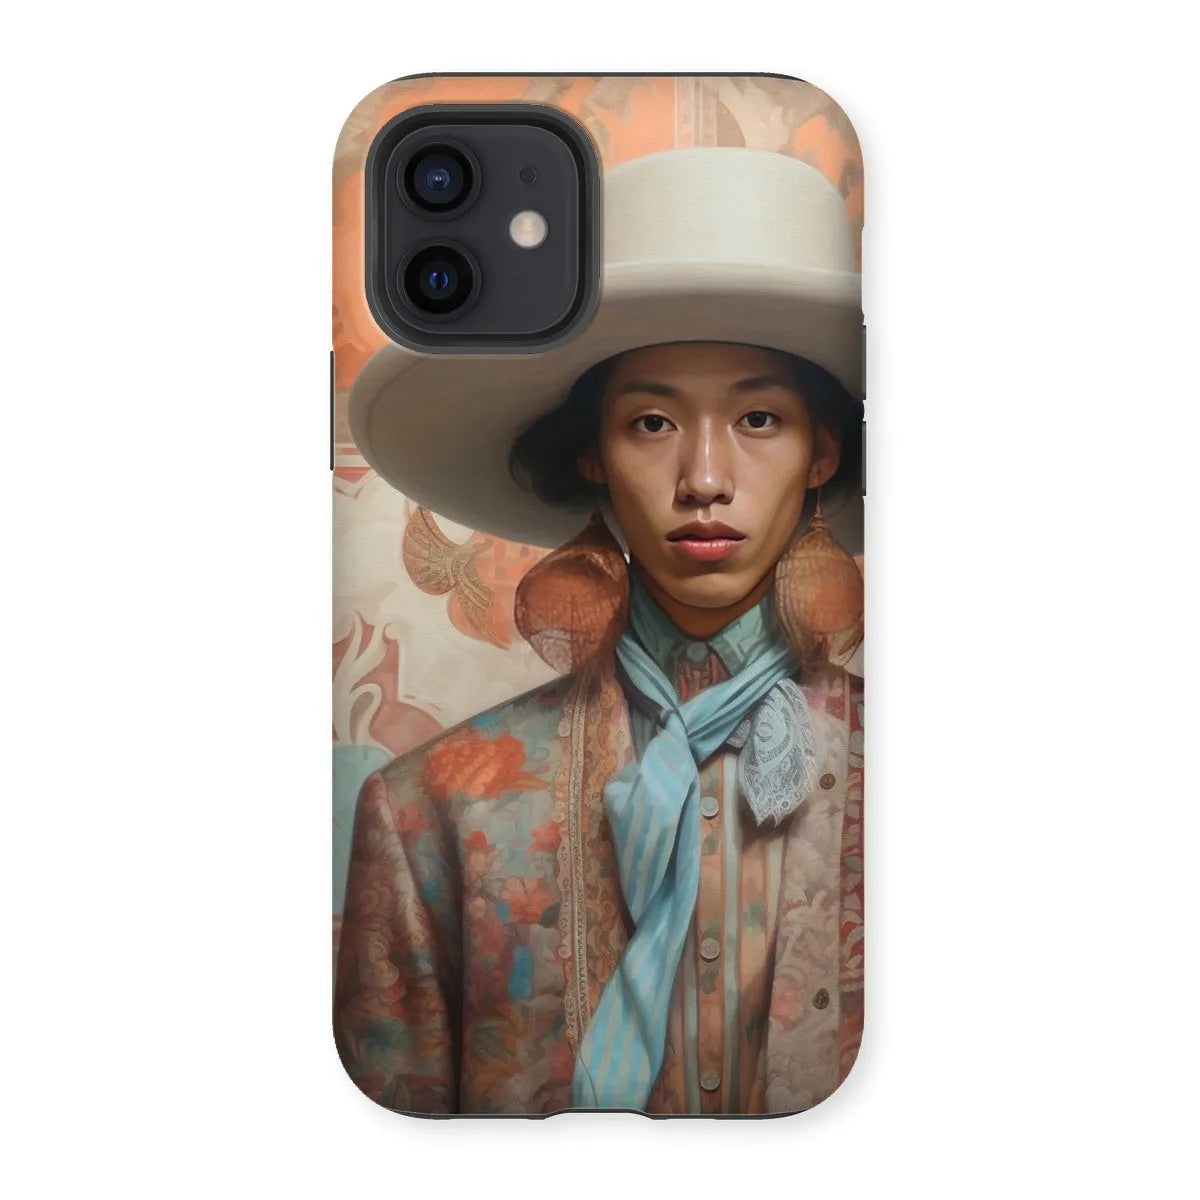 Iyaan - Gay Malay Asian Cowboy Aesthetic Art Phone Case - Iphone 12 / Matte - Mobile Phone Cases - Aesthetic Art